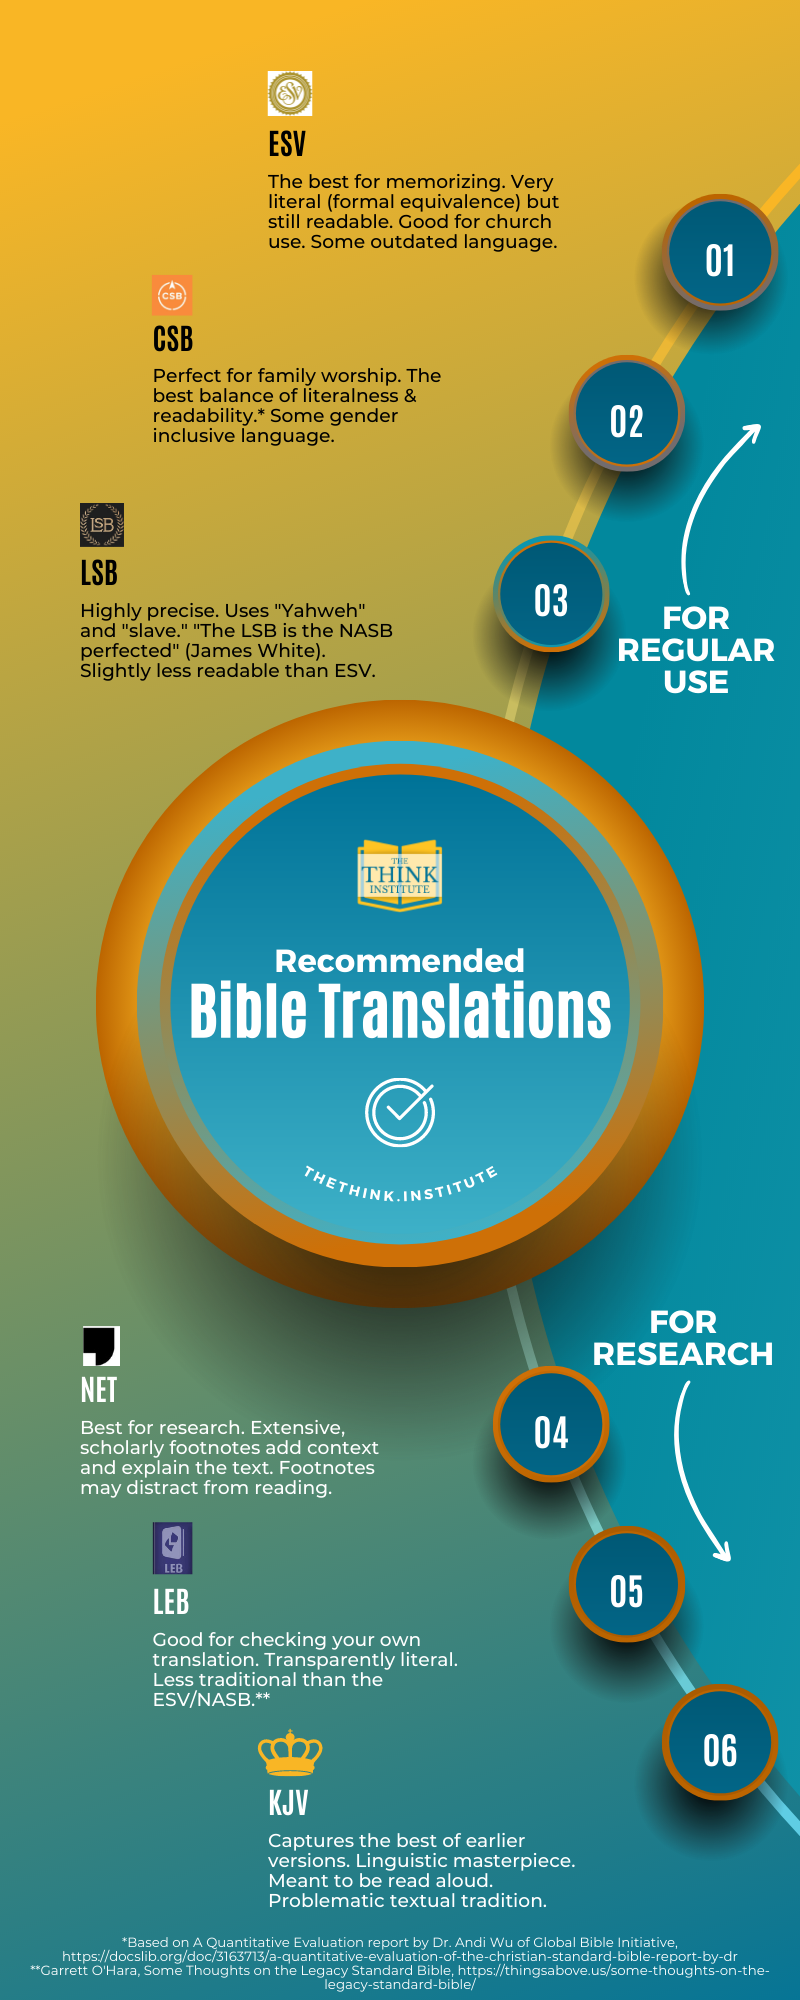 Which Bible Translations Are Best for Regular Use vs. Research? (The